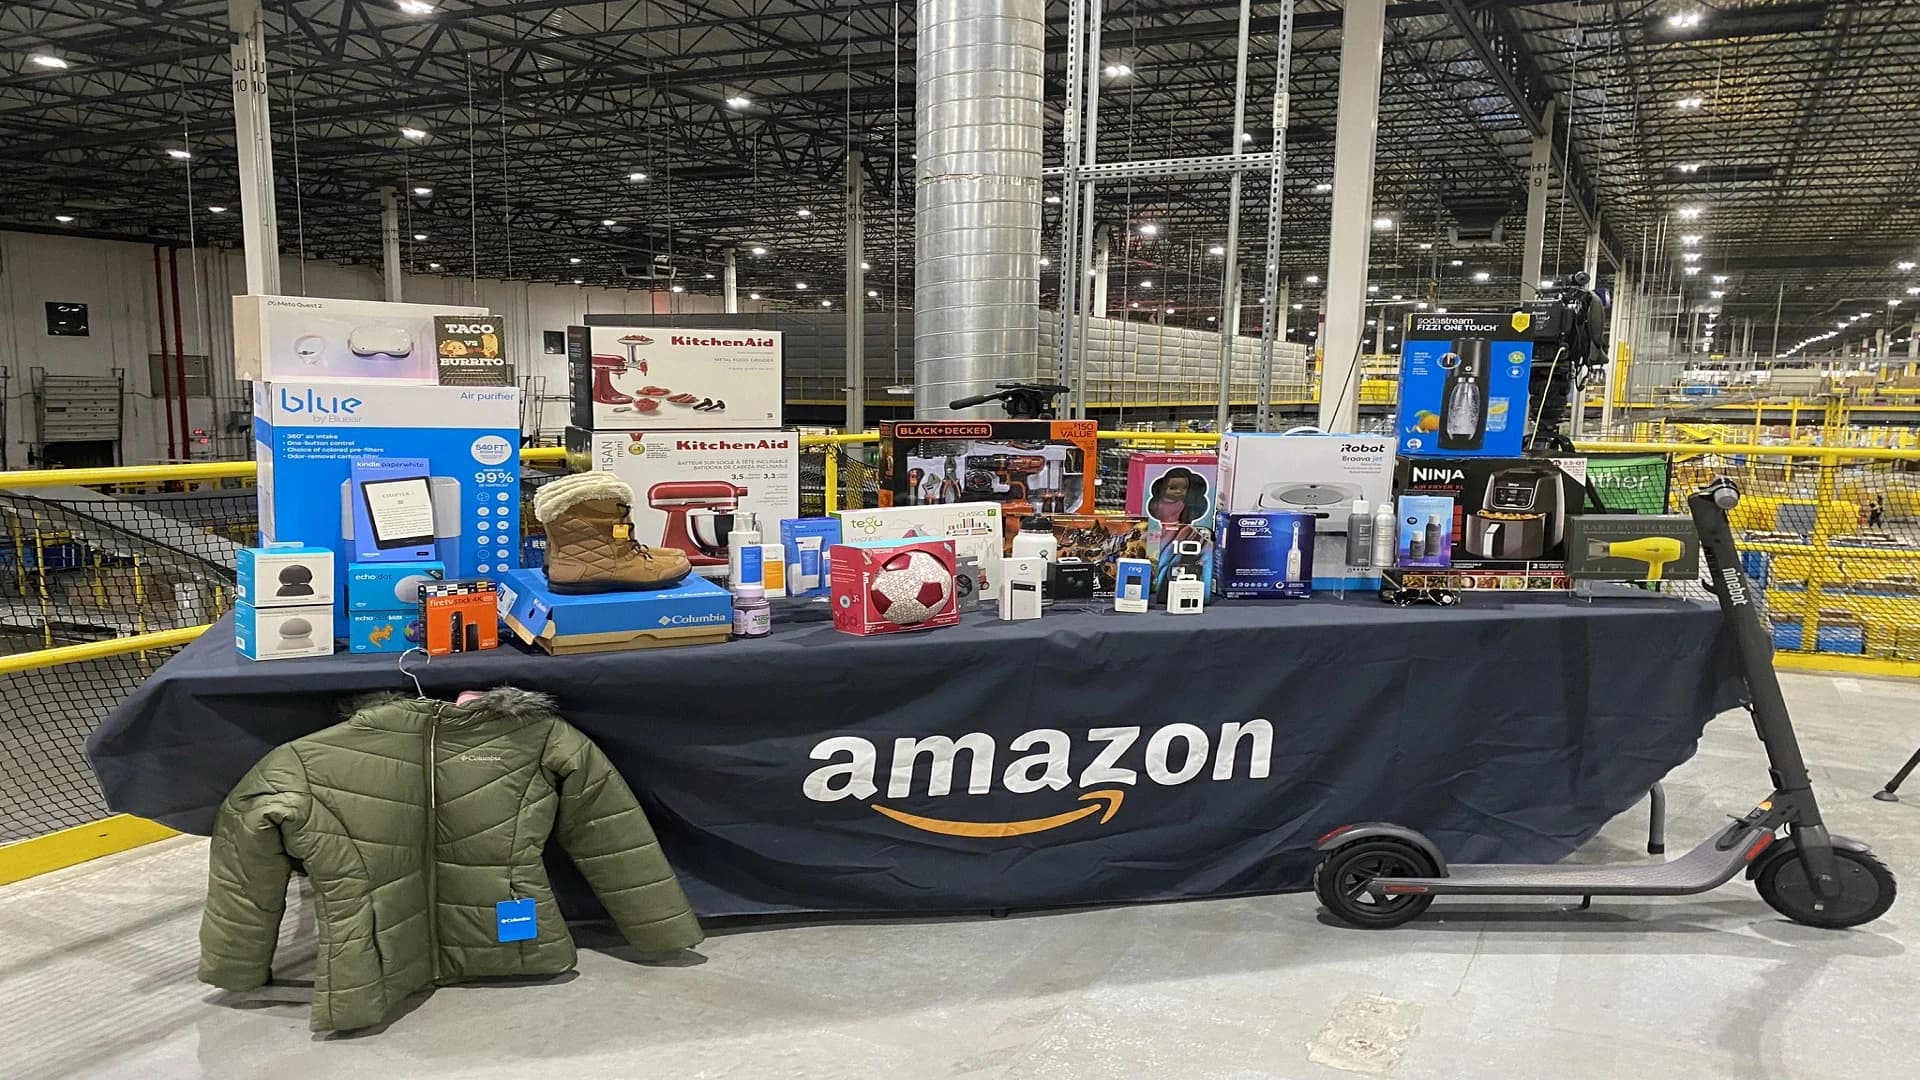 Amazon says it had its biggest Thanksgiving shopping weekend